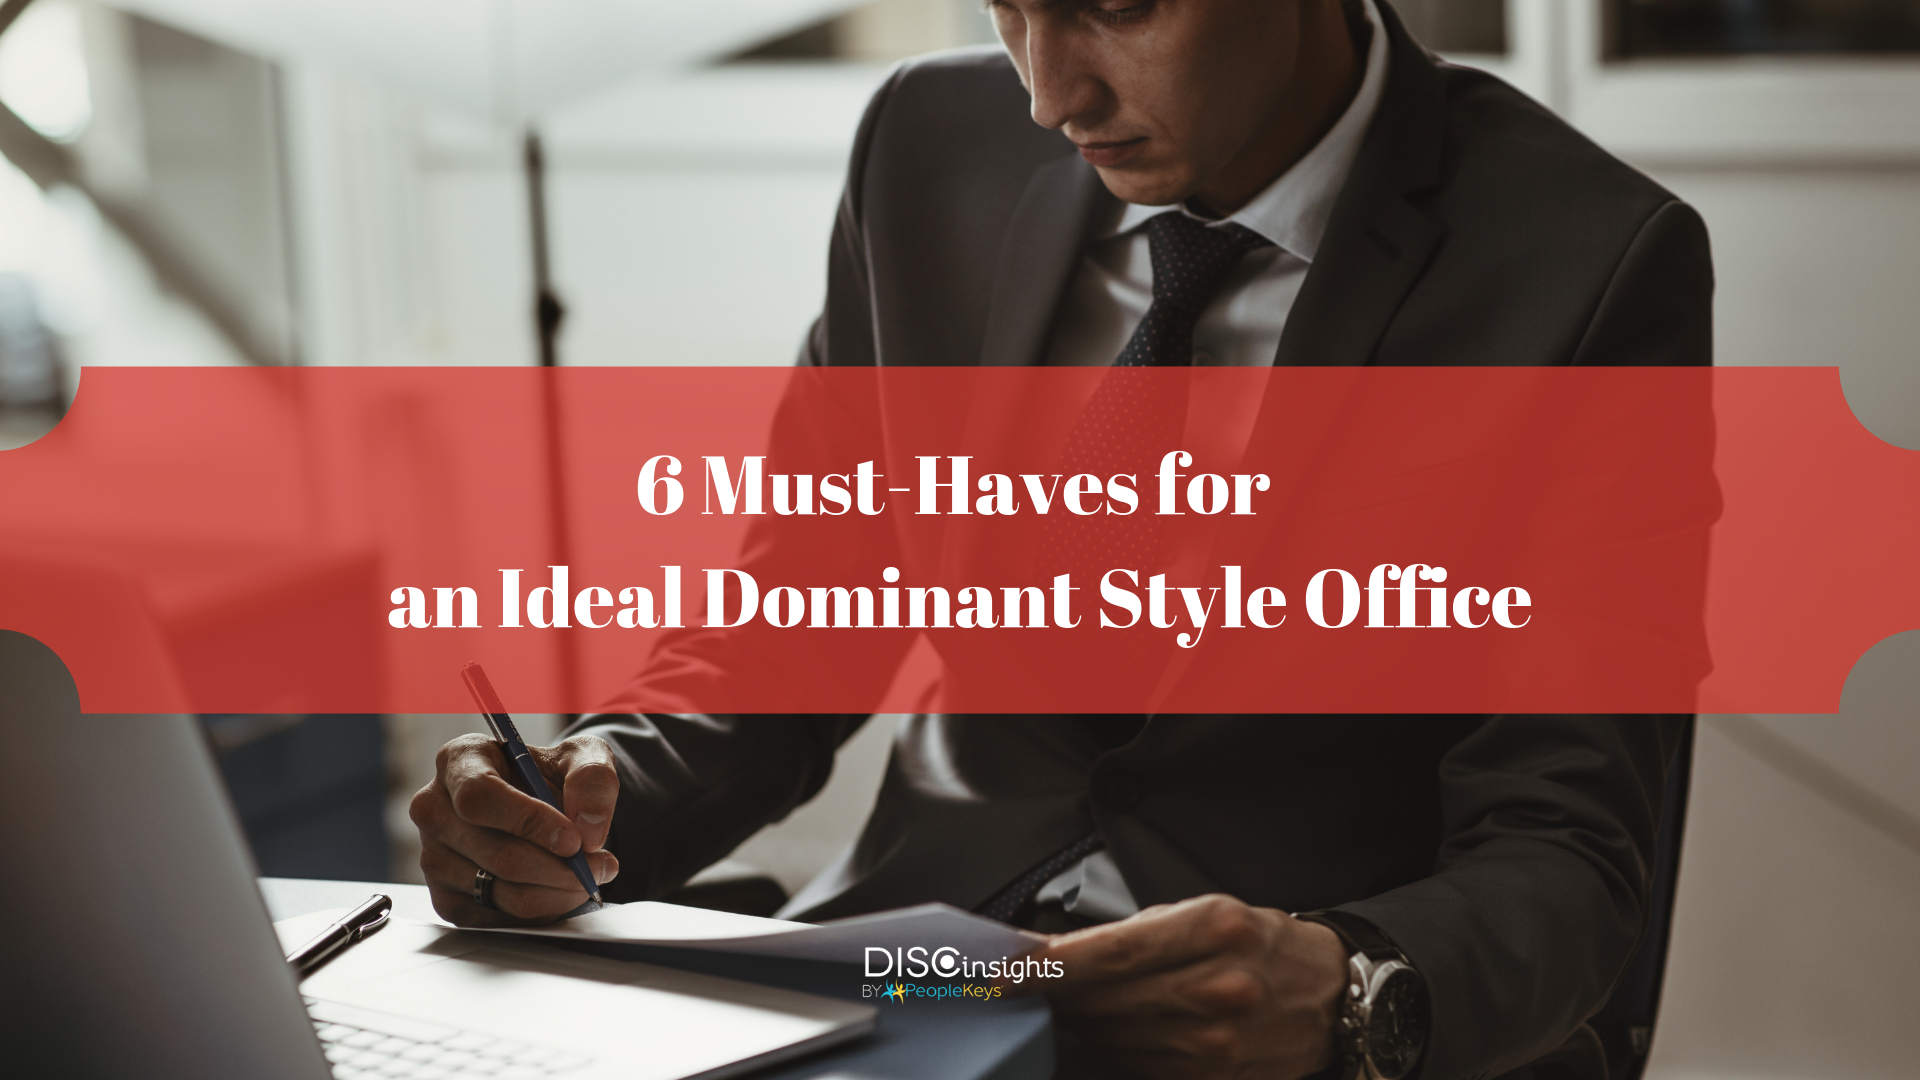 6 Must-Haves for an Ideal Dominant Style Office